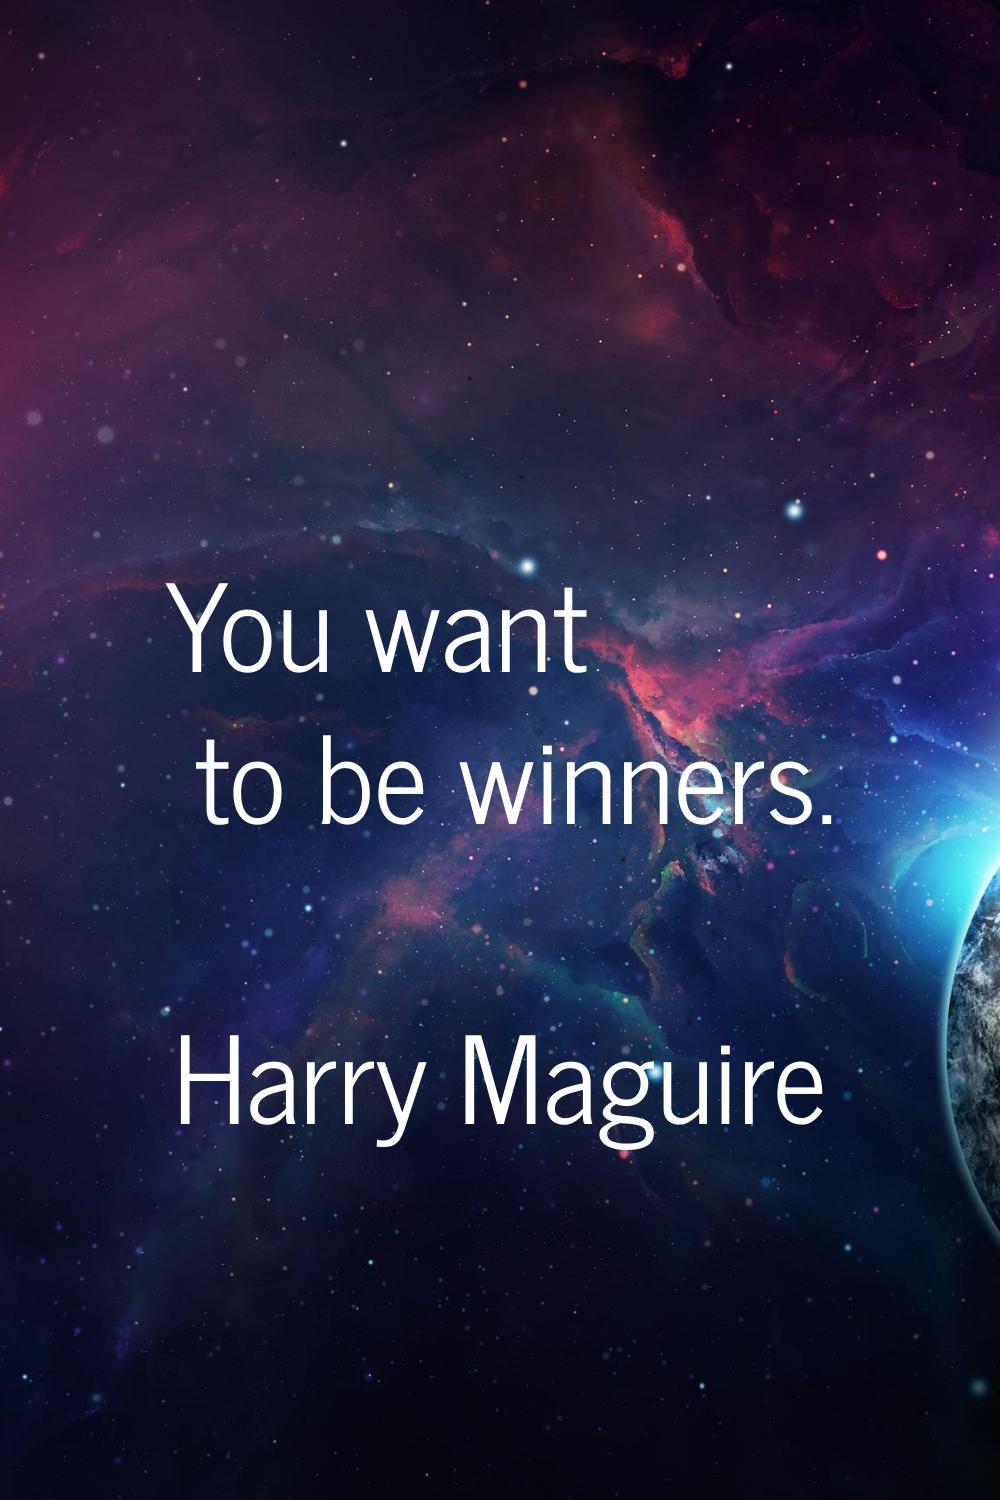 You want to be winners.